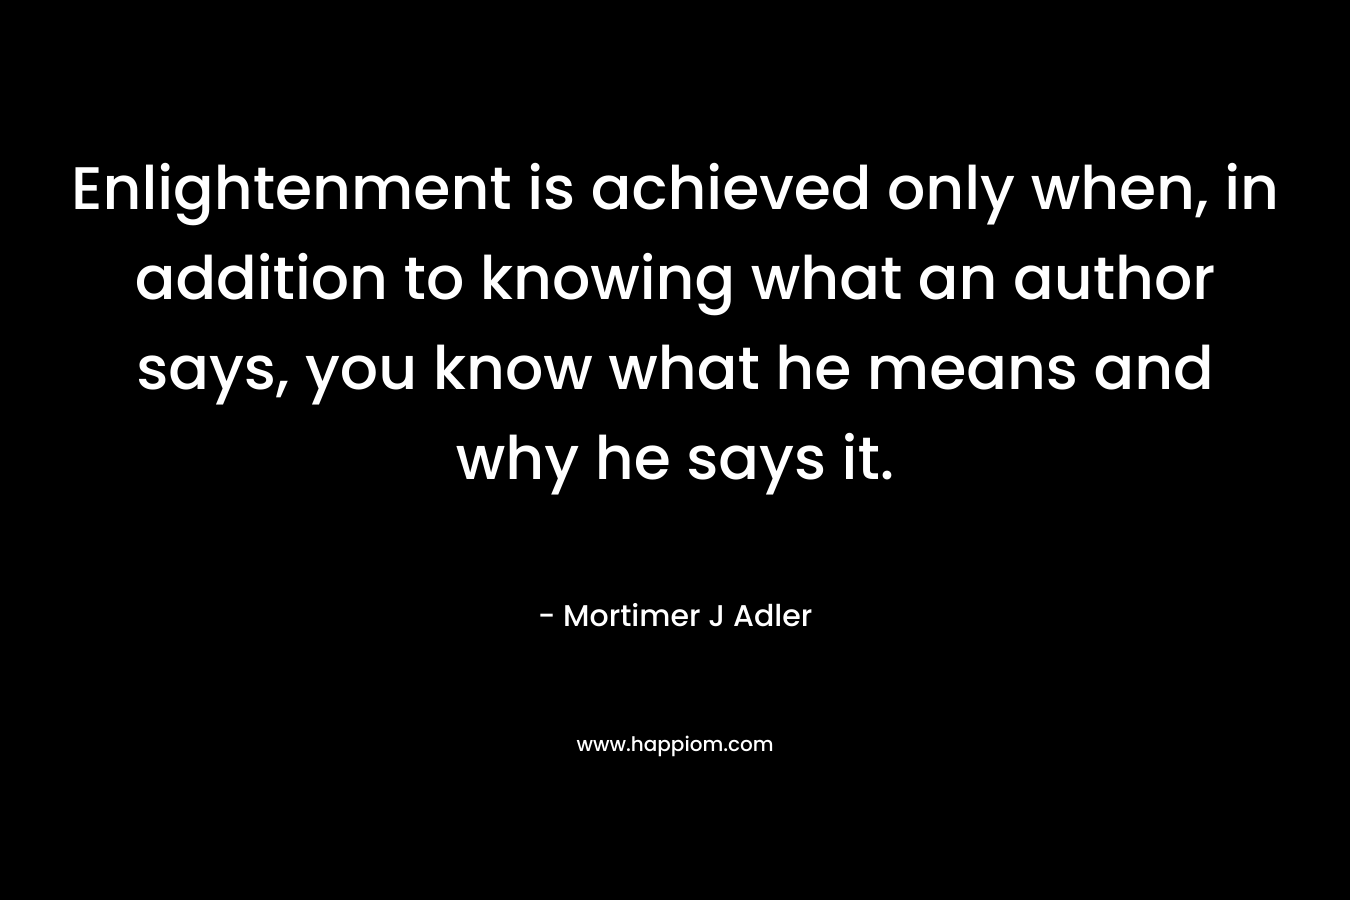 Enlightenment is achieved only when, in addition to knowing what an author says, you know what he means and why he says it. – Mortimer J Adler